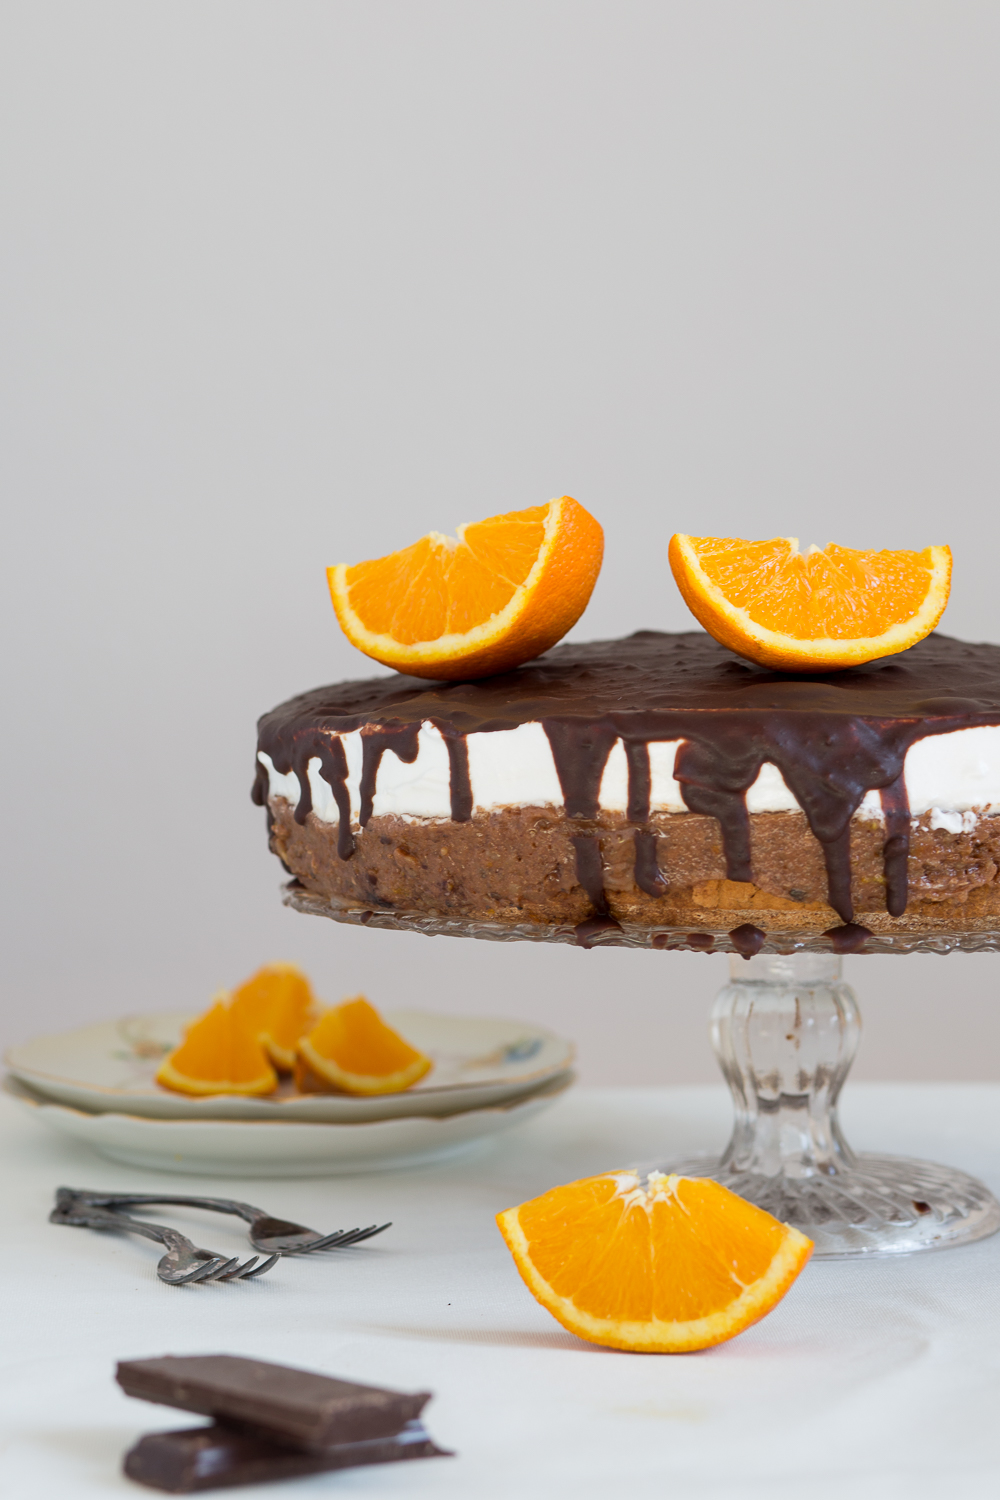 Traditional Serbian cake called Vaso's Cake. Made with dark chocolate, oranges, walnuts and meringue.